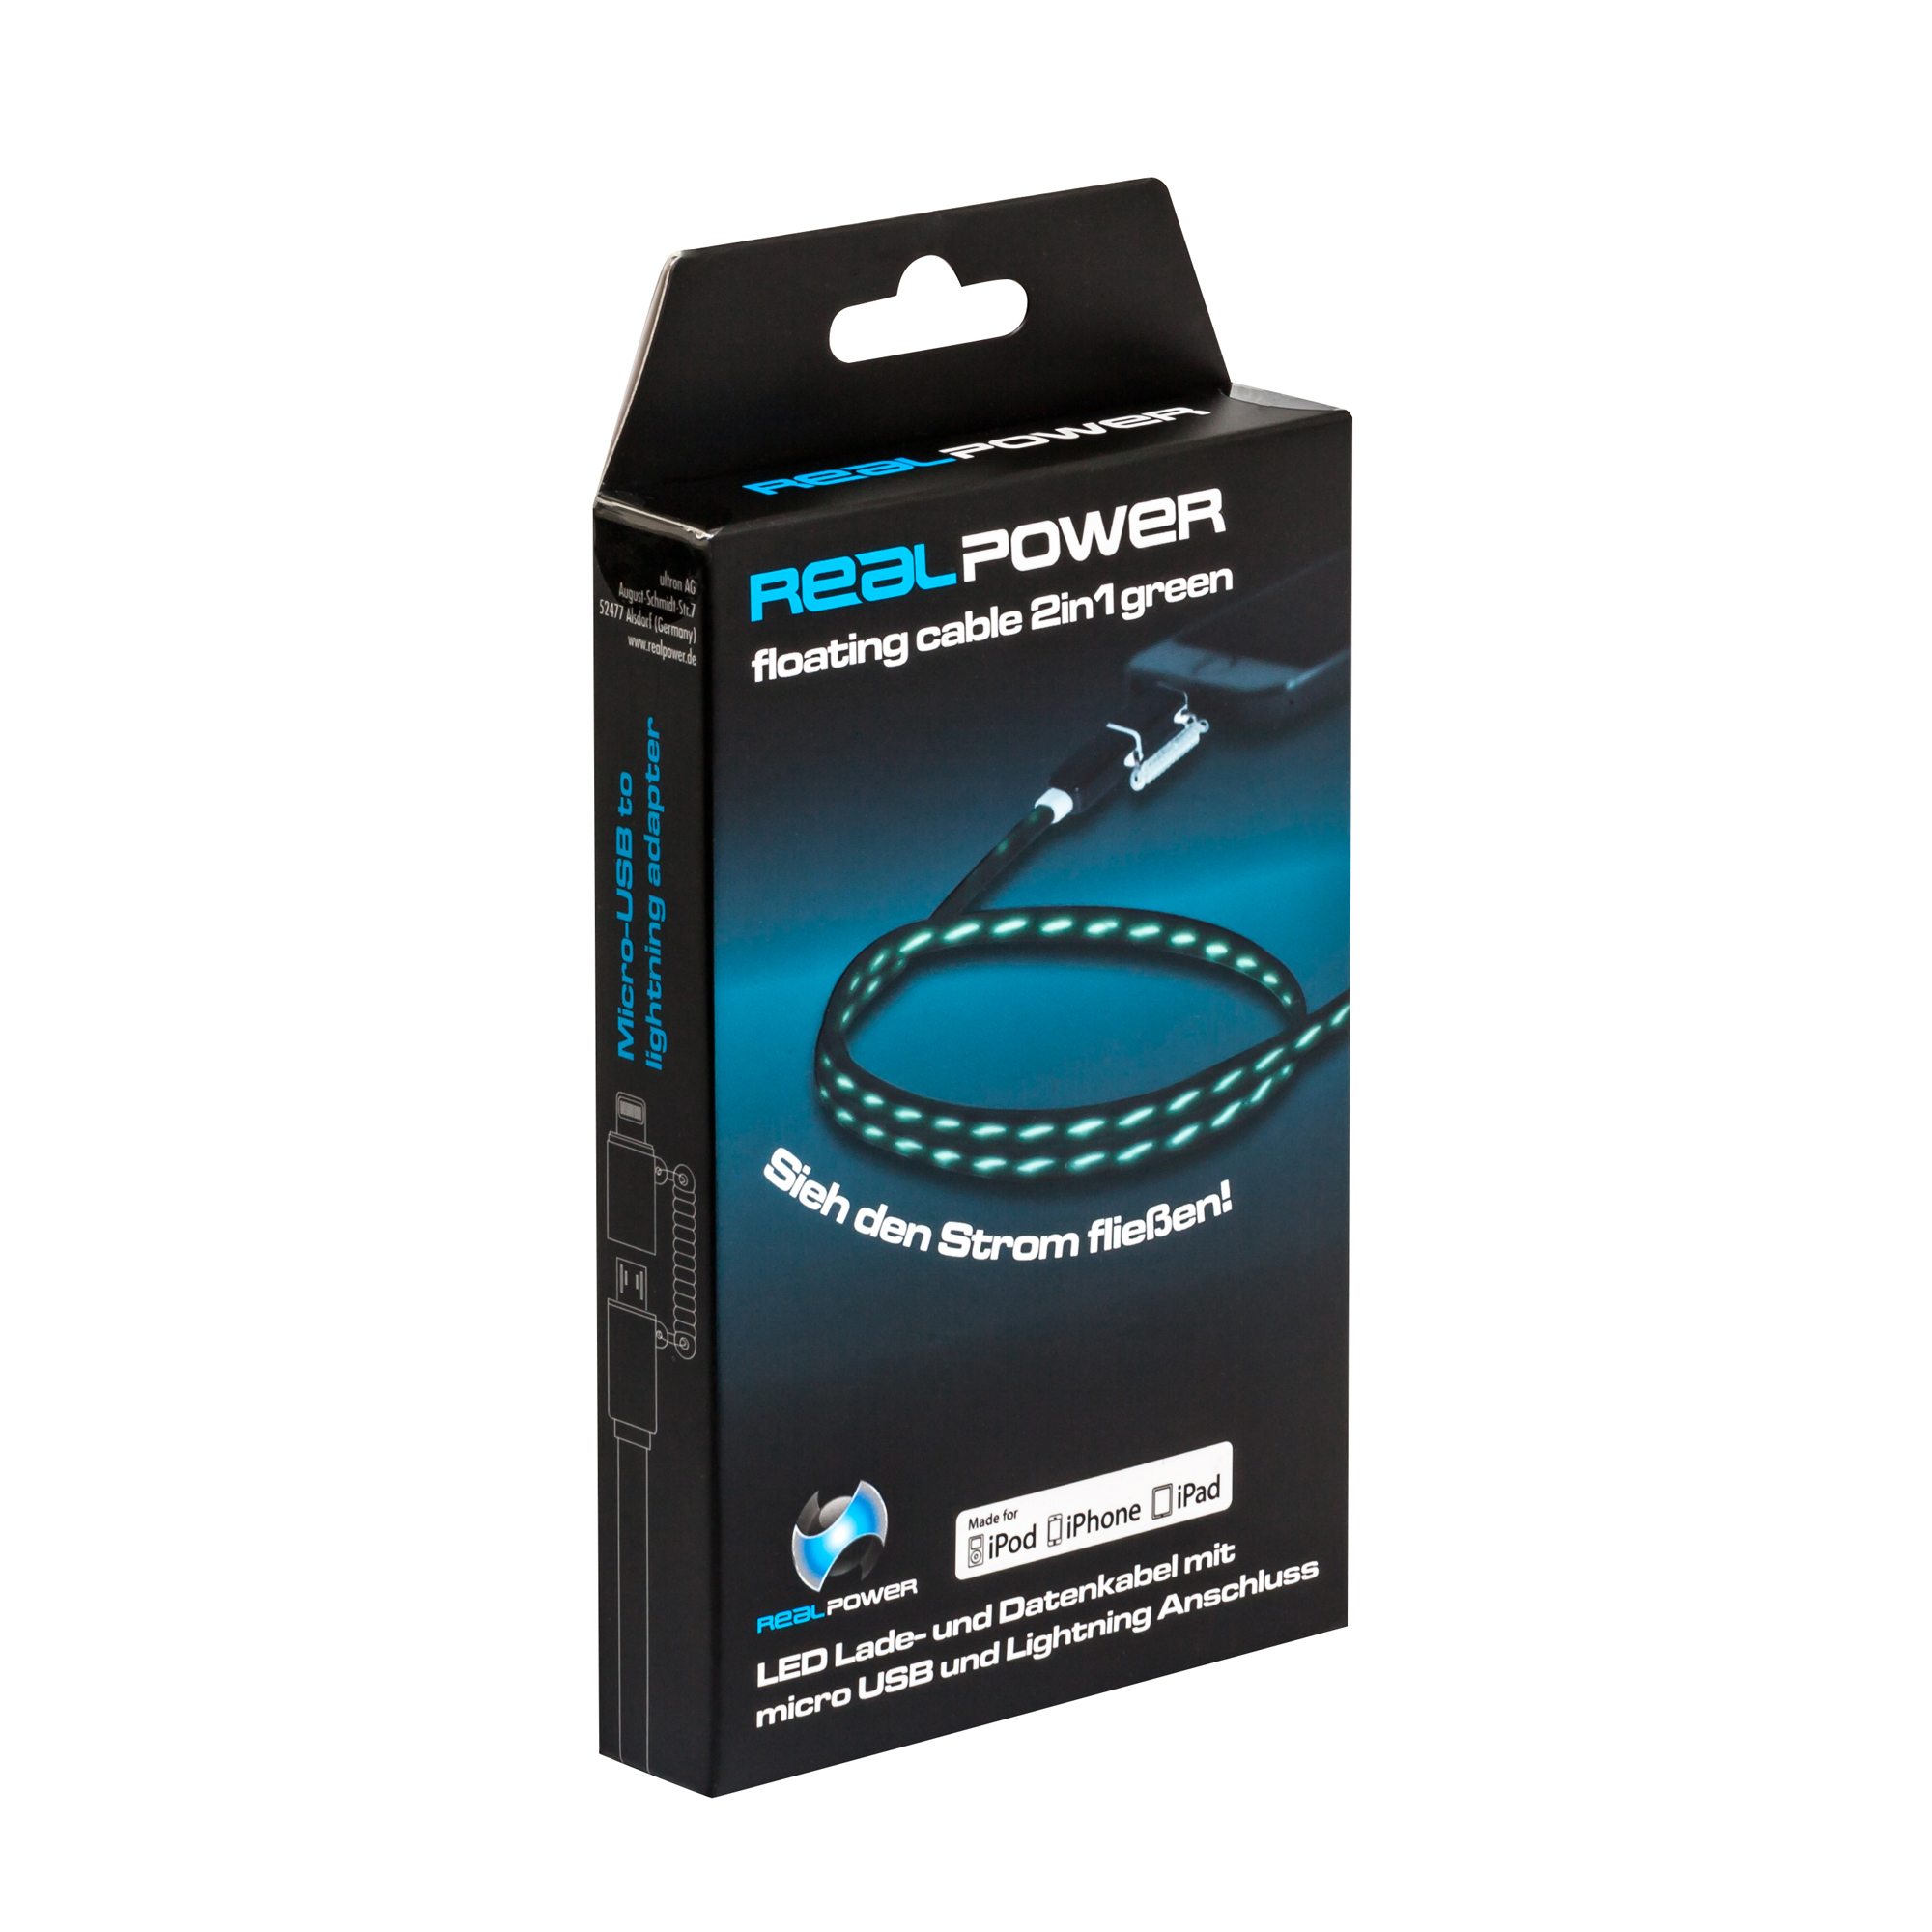 REALPOWER Floating 2in1, Schwarz/Grün Kabel 2in1, cable